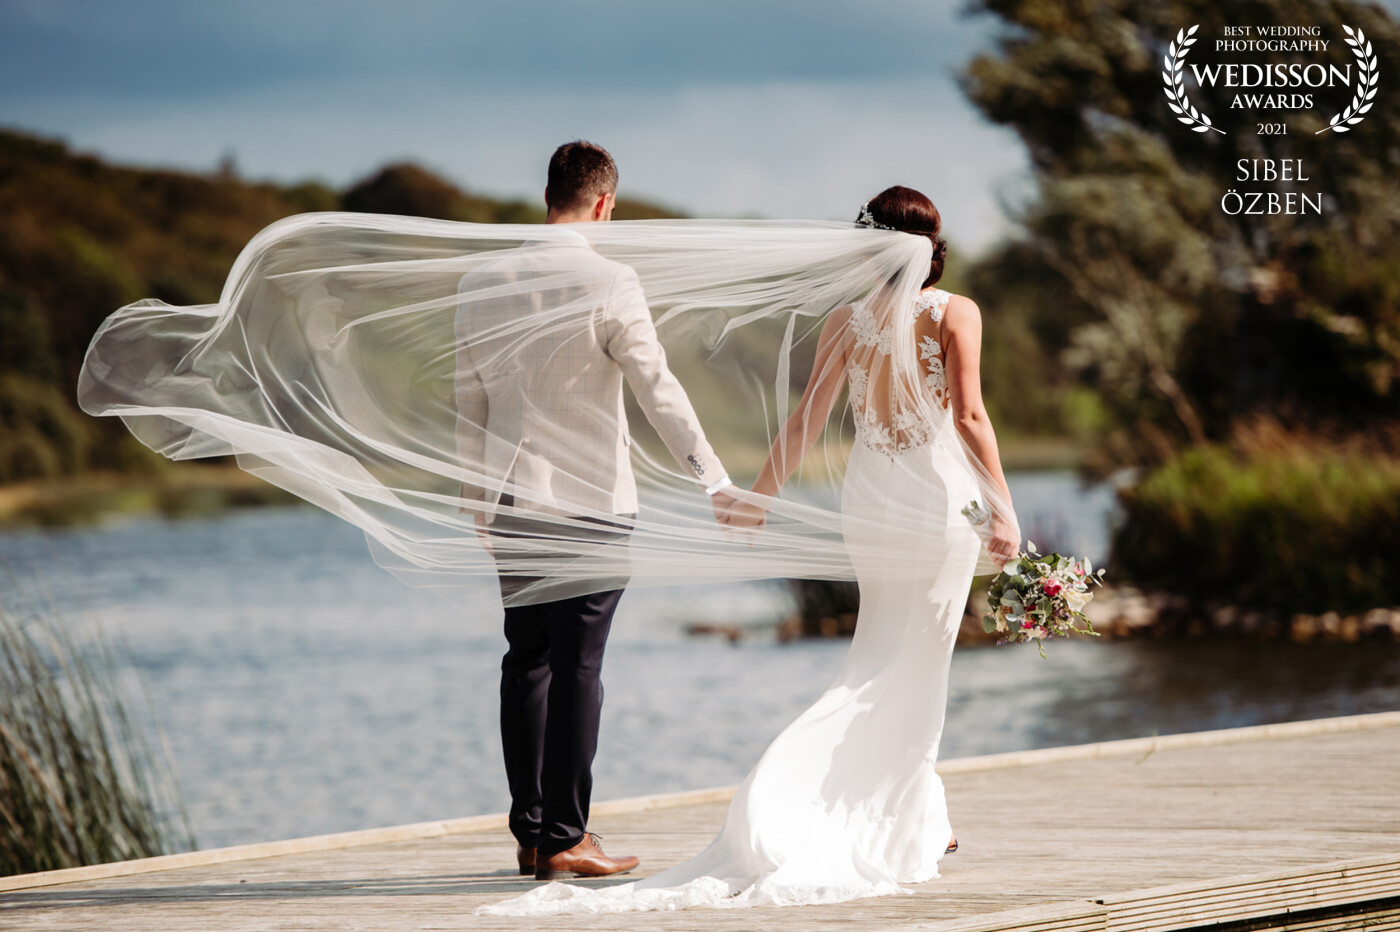 This was a wedding we shot in a magical Irish venue in Co. Tipperary, in Ireland. Truly like a place straight from a fairytale. On this August day the warm summer breeze gently lifted our beautiful bride's vale and like it was held by fairies it floated behind our couple as they walked hand in hand on the jetty. 